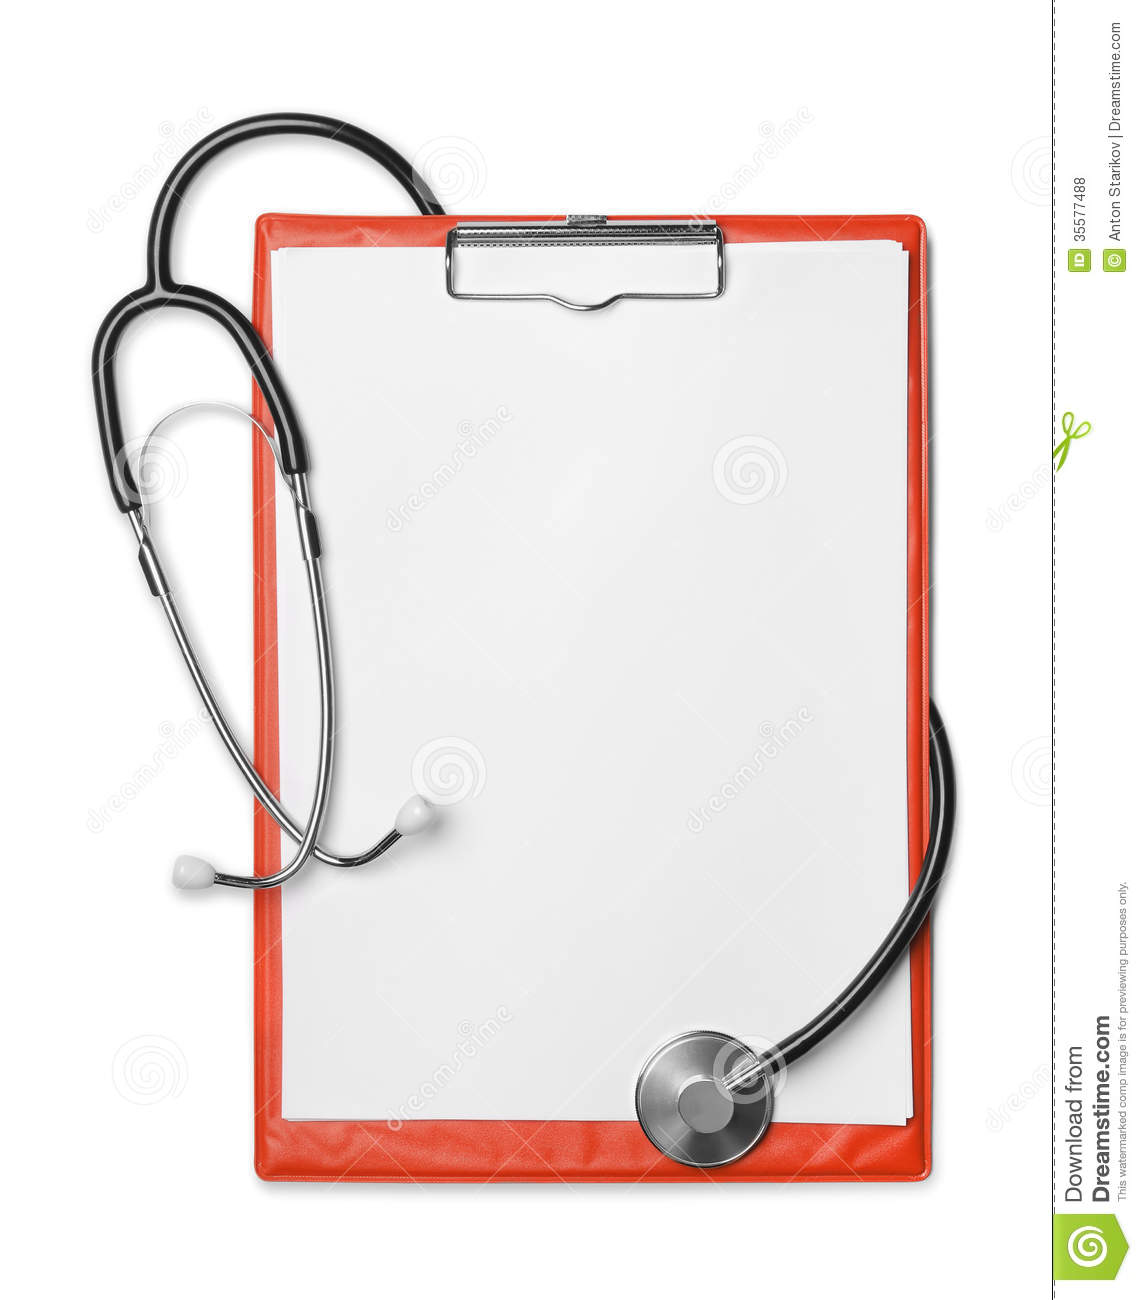 Clipboard And Stethoscope Royalty Free Stock Photos   Image  35577488